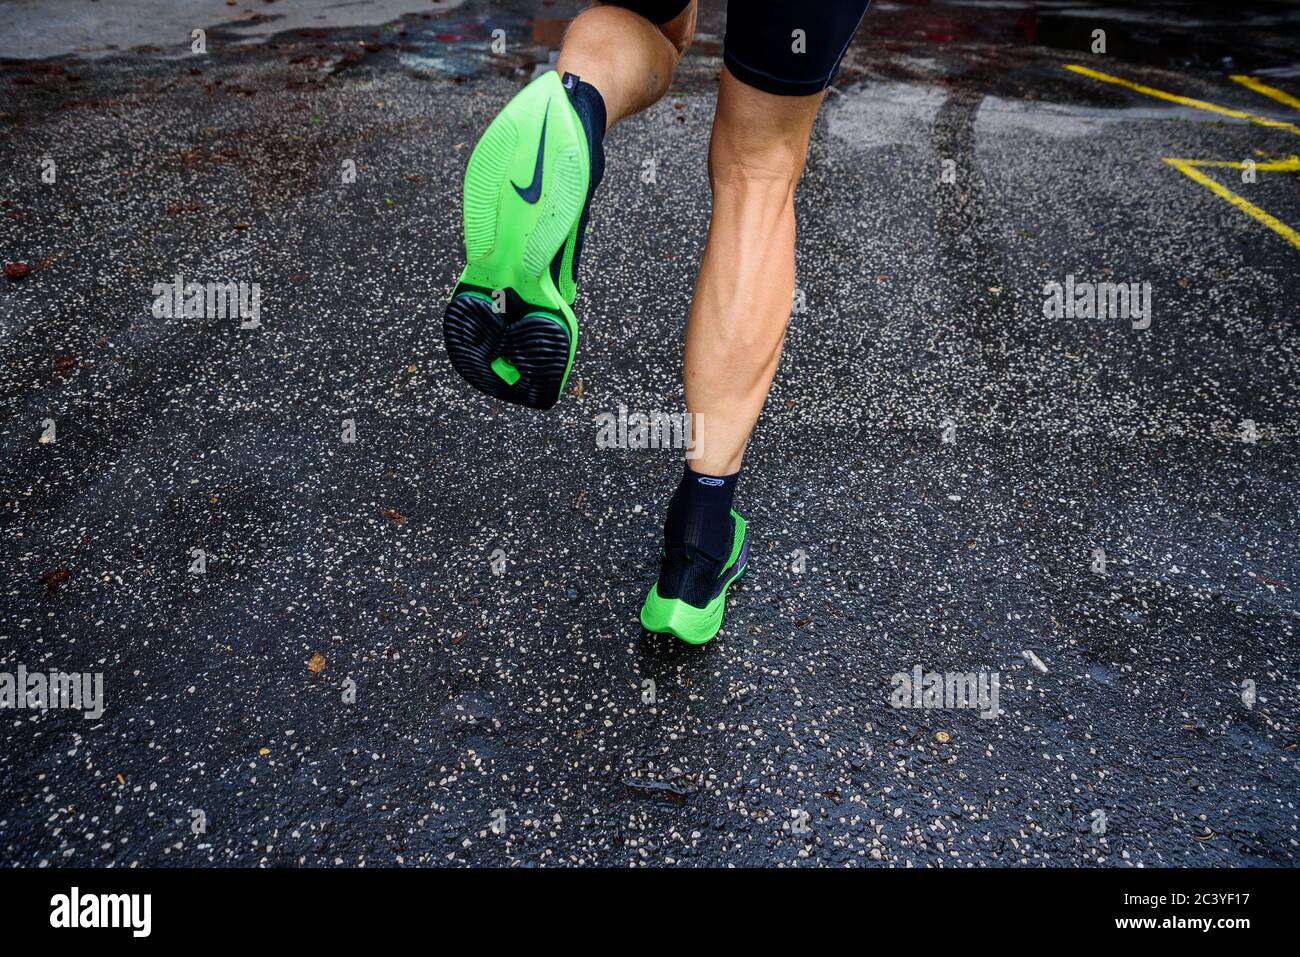 ROME, ITALY, JUNE 23. 2020: Nike running shoes ALPHAFLY NEXT%.  Controversial green athletics shoe on legs of professional athlete running  on the road Stock Photo - Alamy